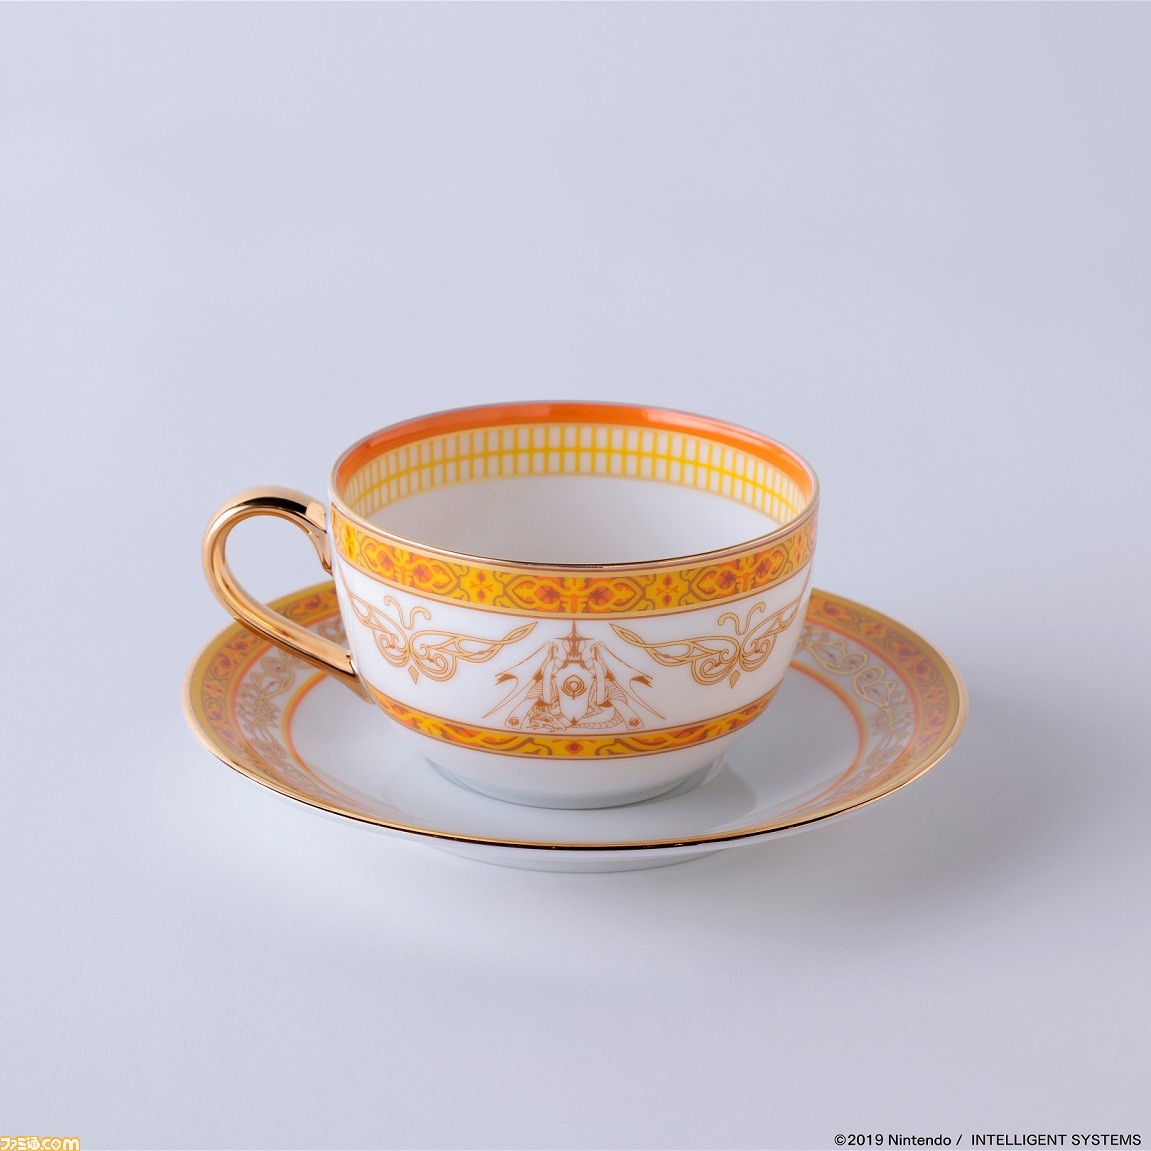 Reproductions of tea sets, original blended teas, etc. that appeared in 